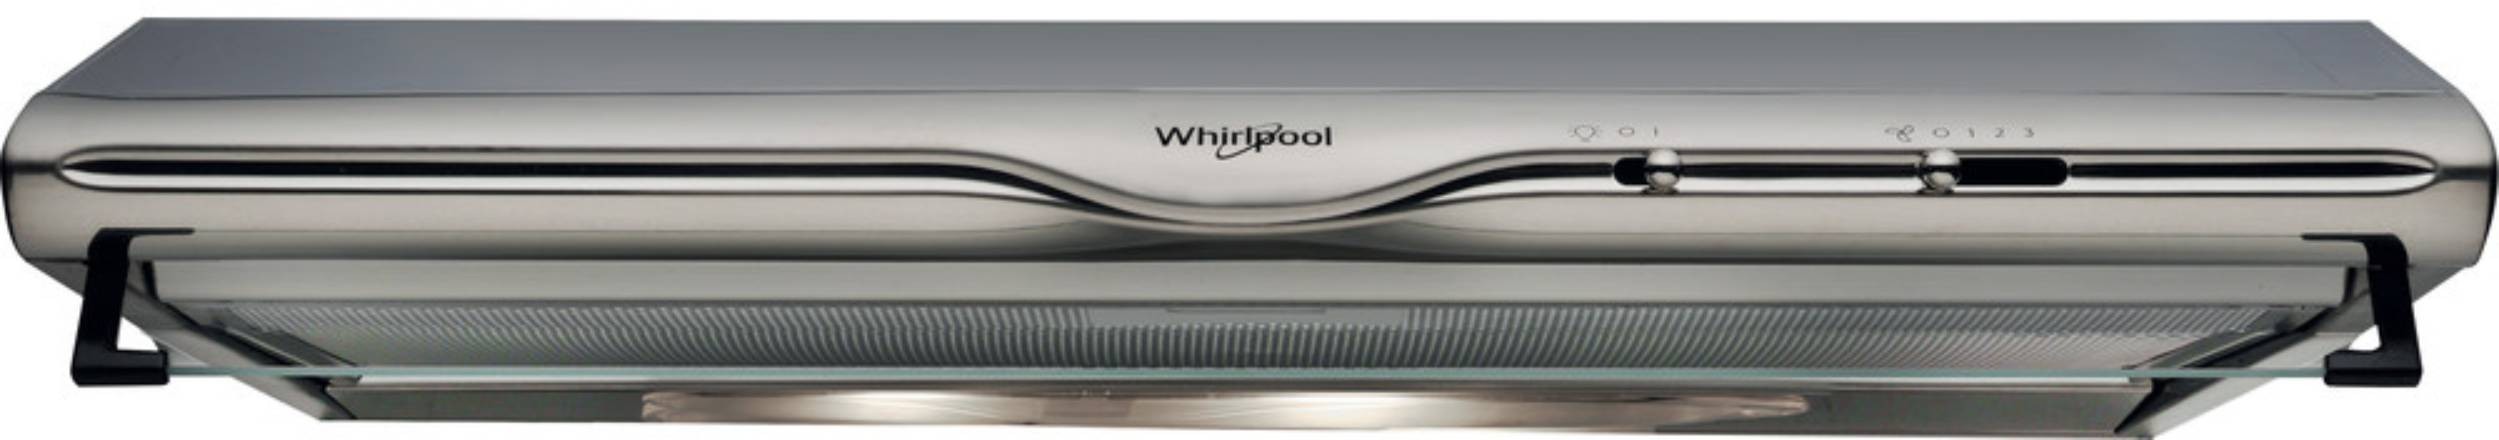 WHIRLPOOL Hotte casquette  - WCN65FLX